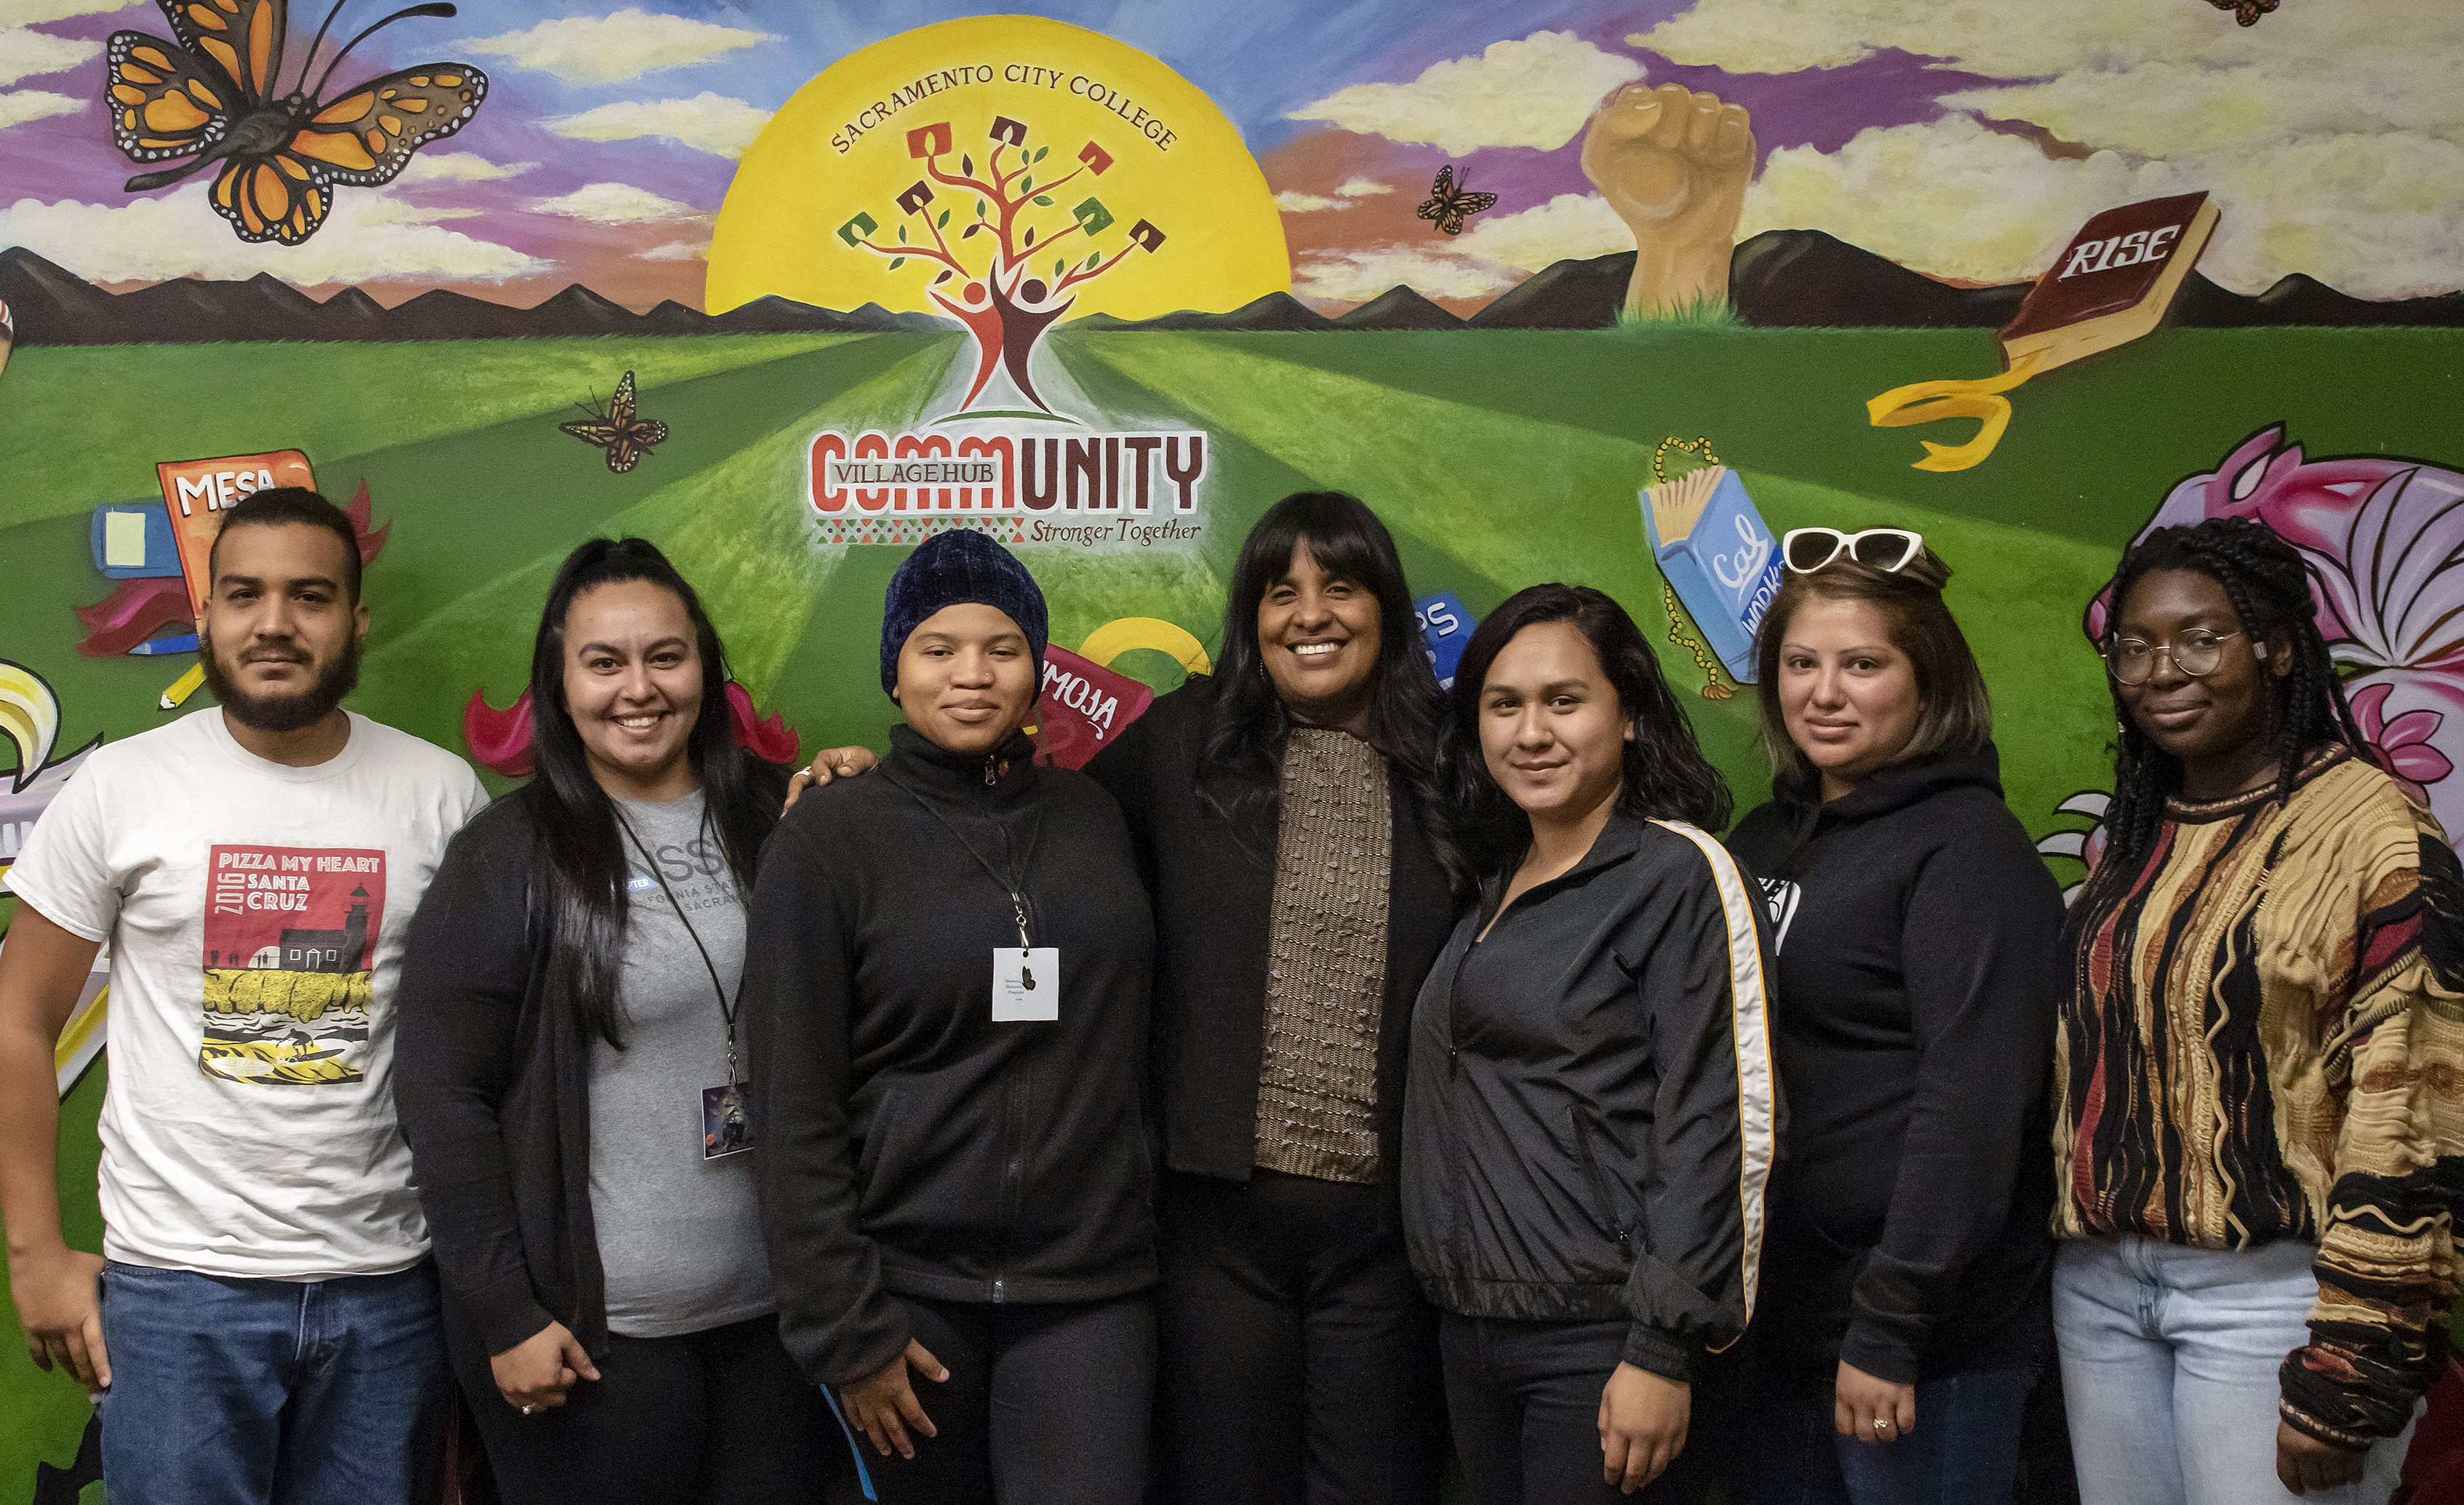 Anayansi Prado (center), documentary filmmaker, and Sacramento State and City College students during the meet and greet before the screening of “The Unafraid” during the Undocumented Student Week of Action at the Student Center at City College Friday, Oct. 18, 2019. (Sara Nevis/snevis.express@gmail.com)